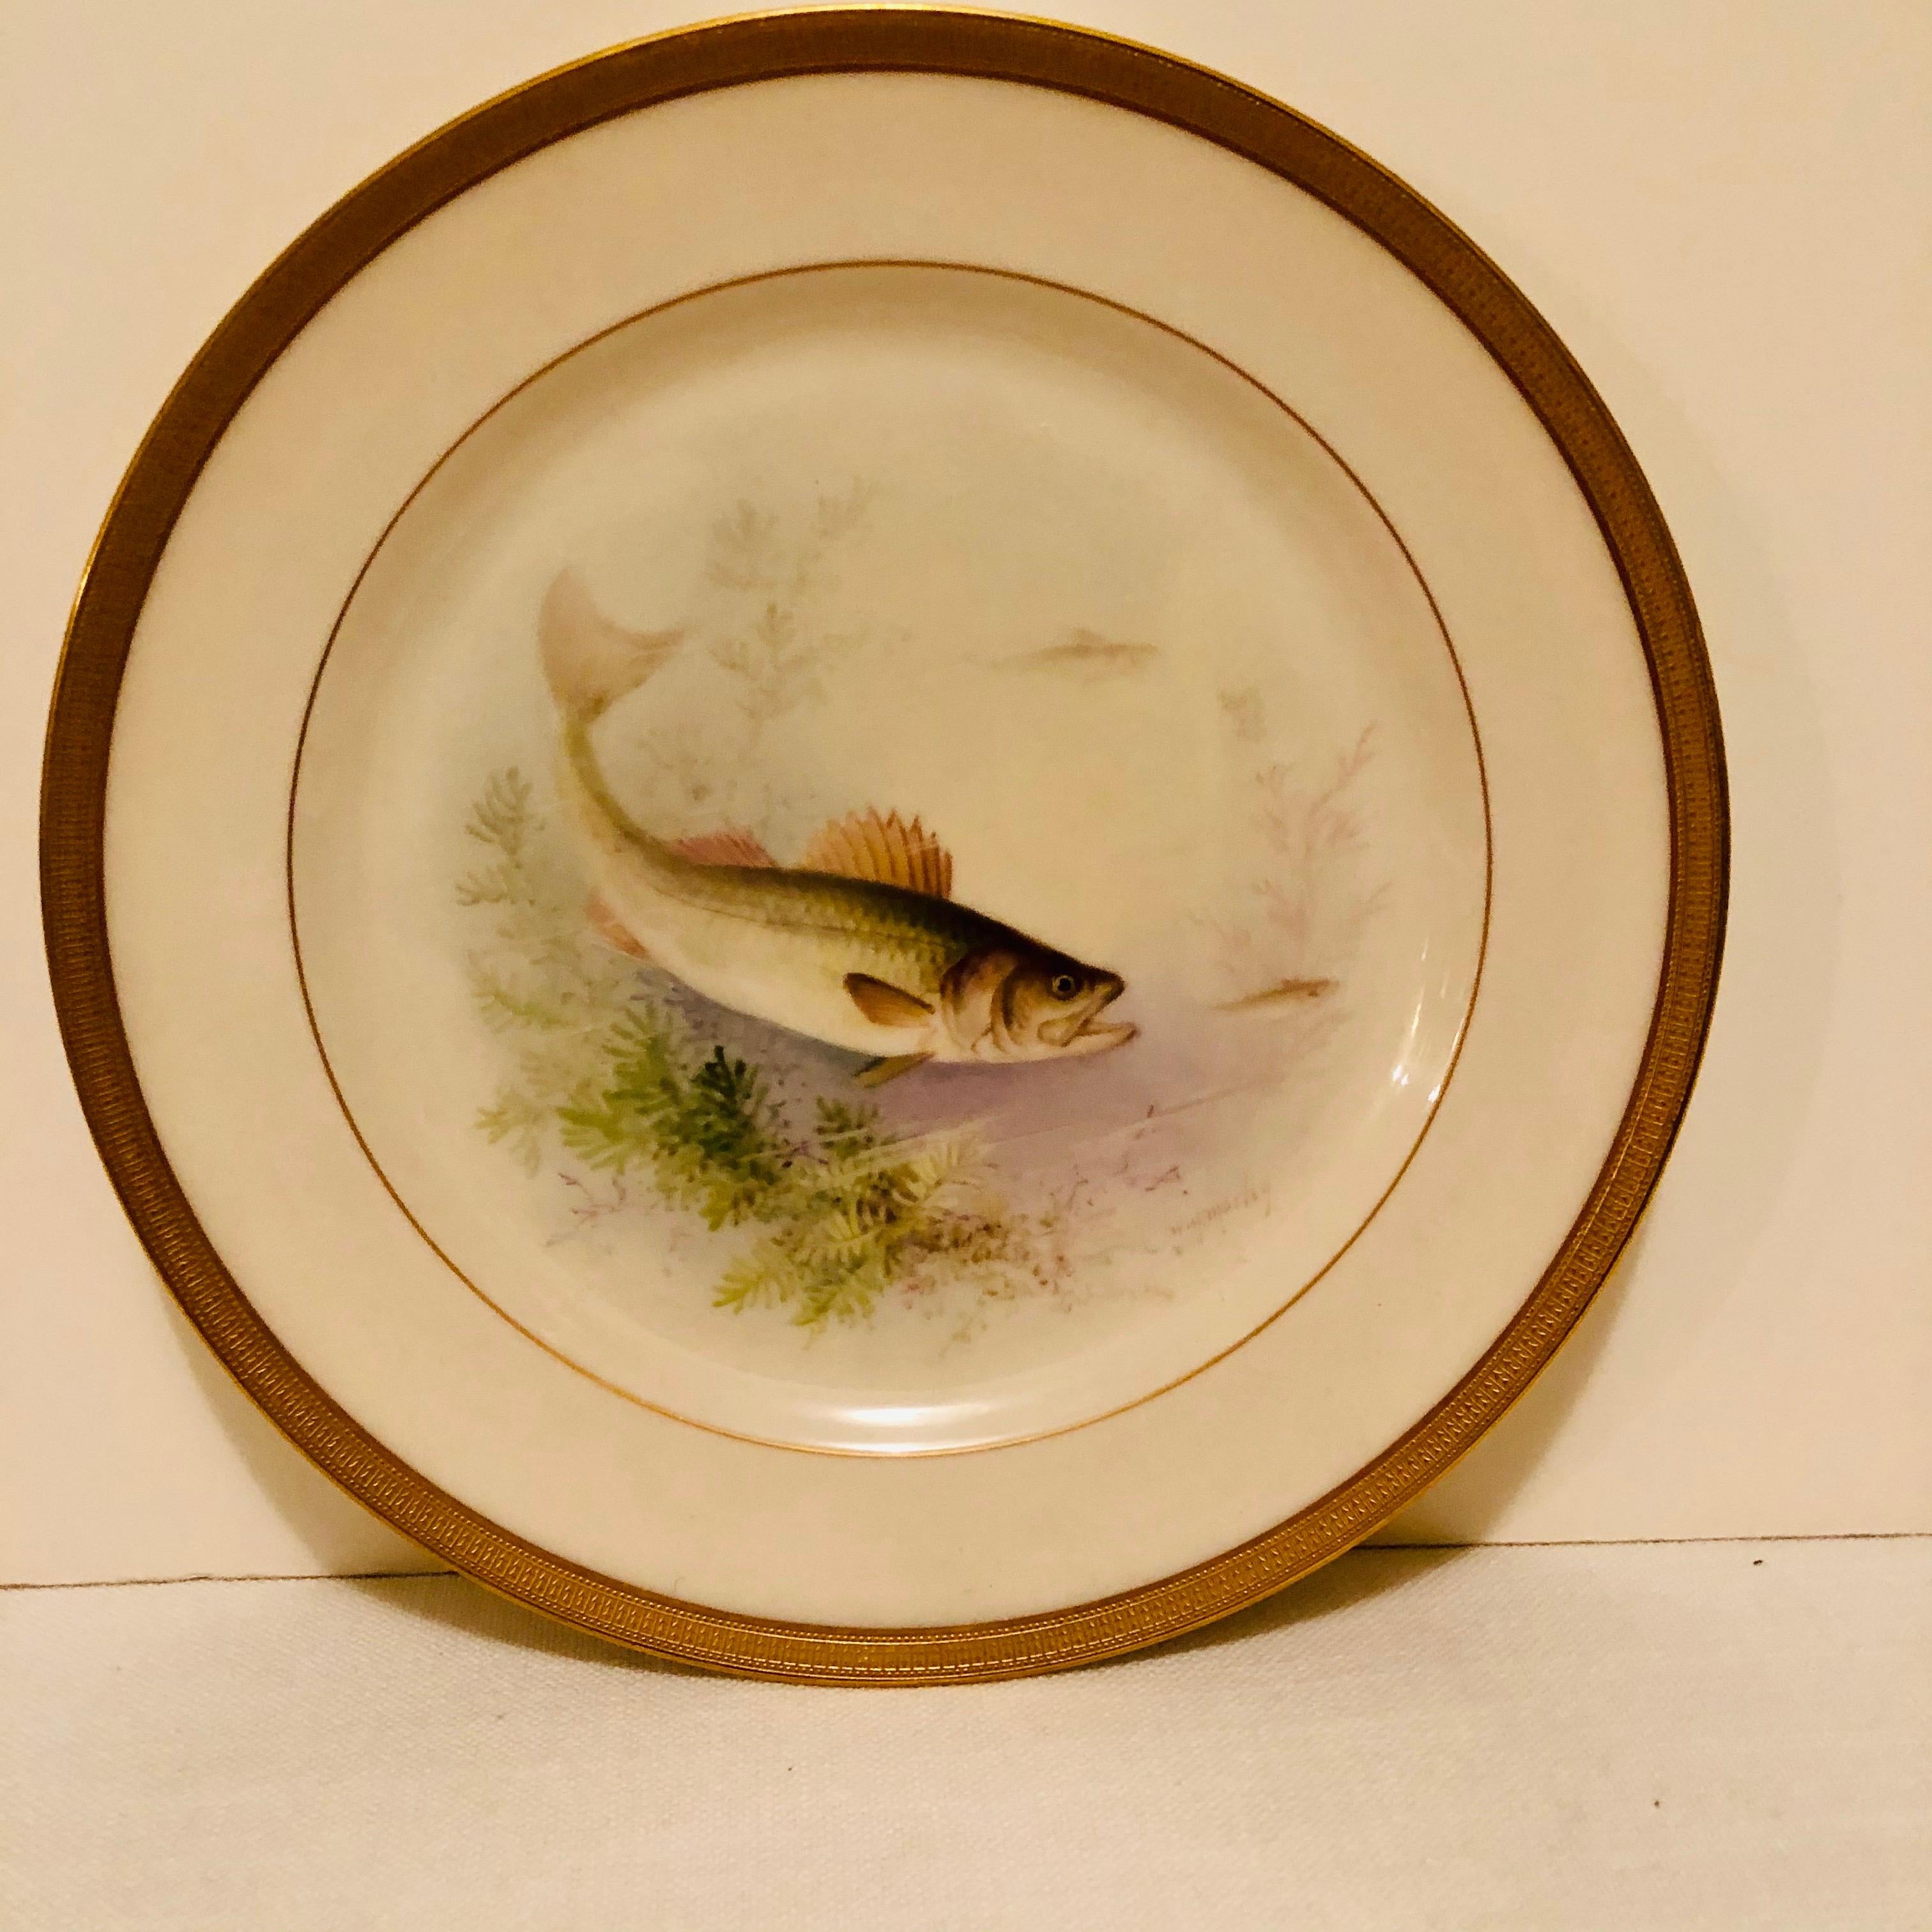 Set of Lenox Fish Plates Each Painted with Different Fish Artist Signed Morley 4